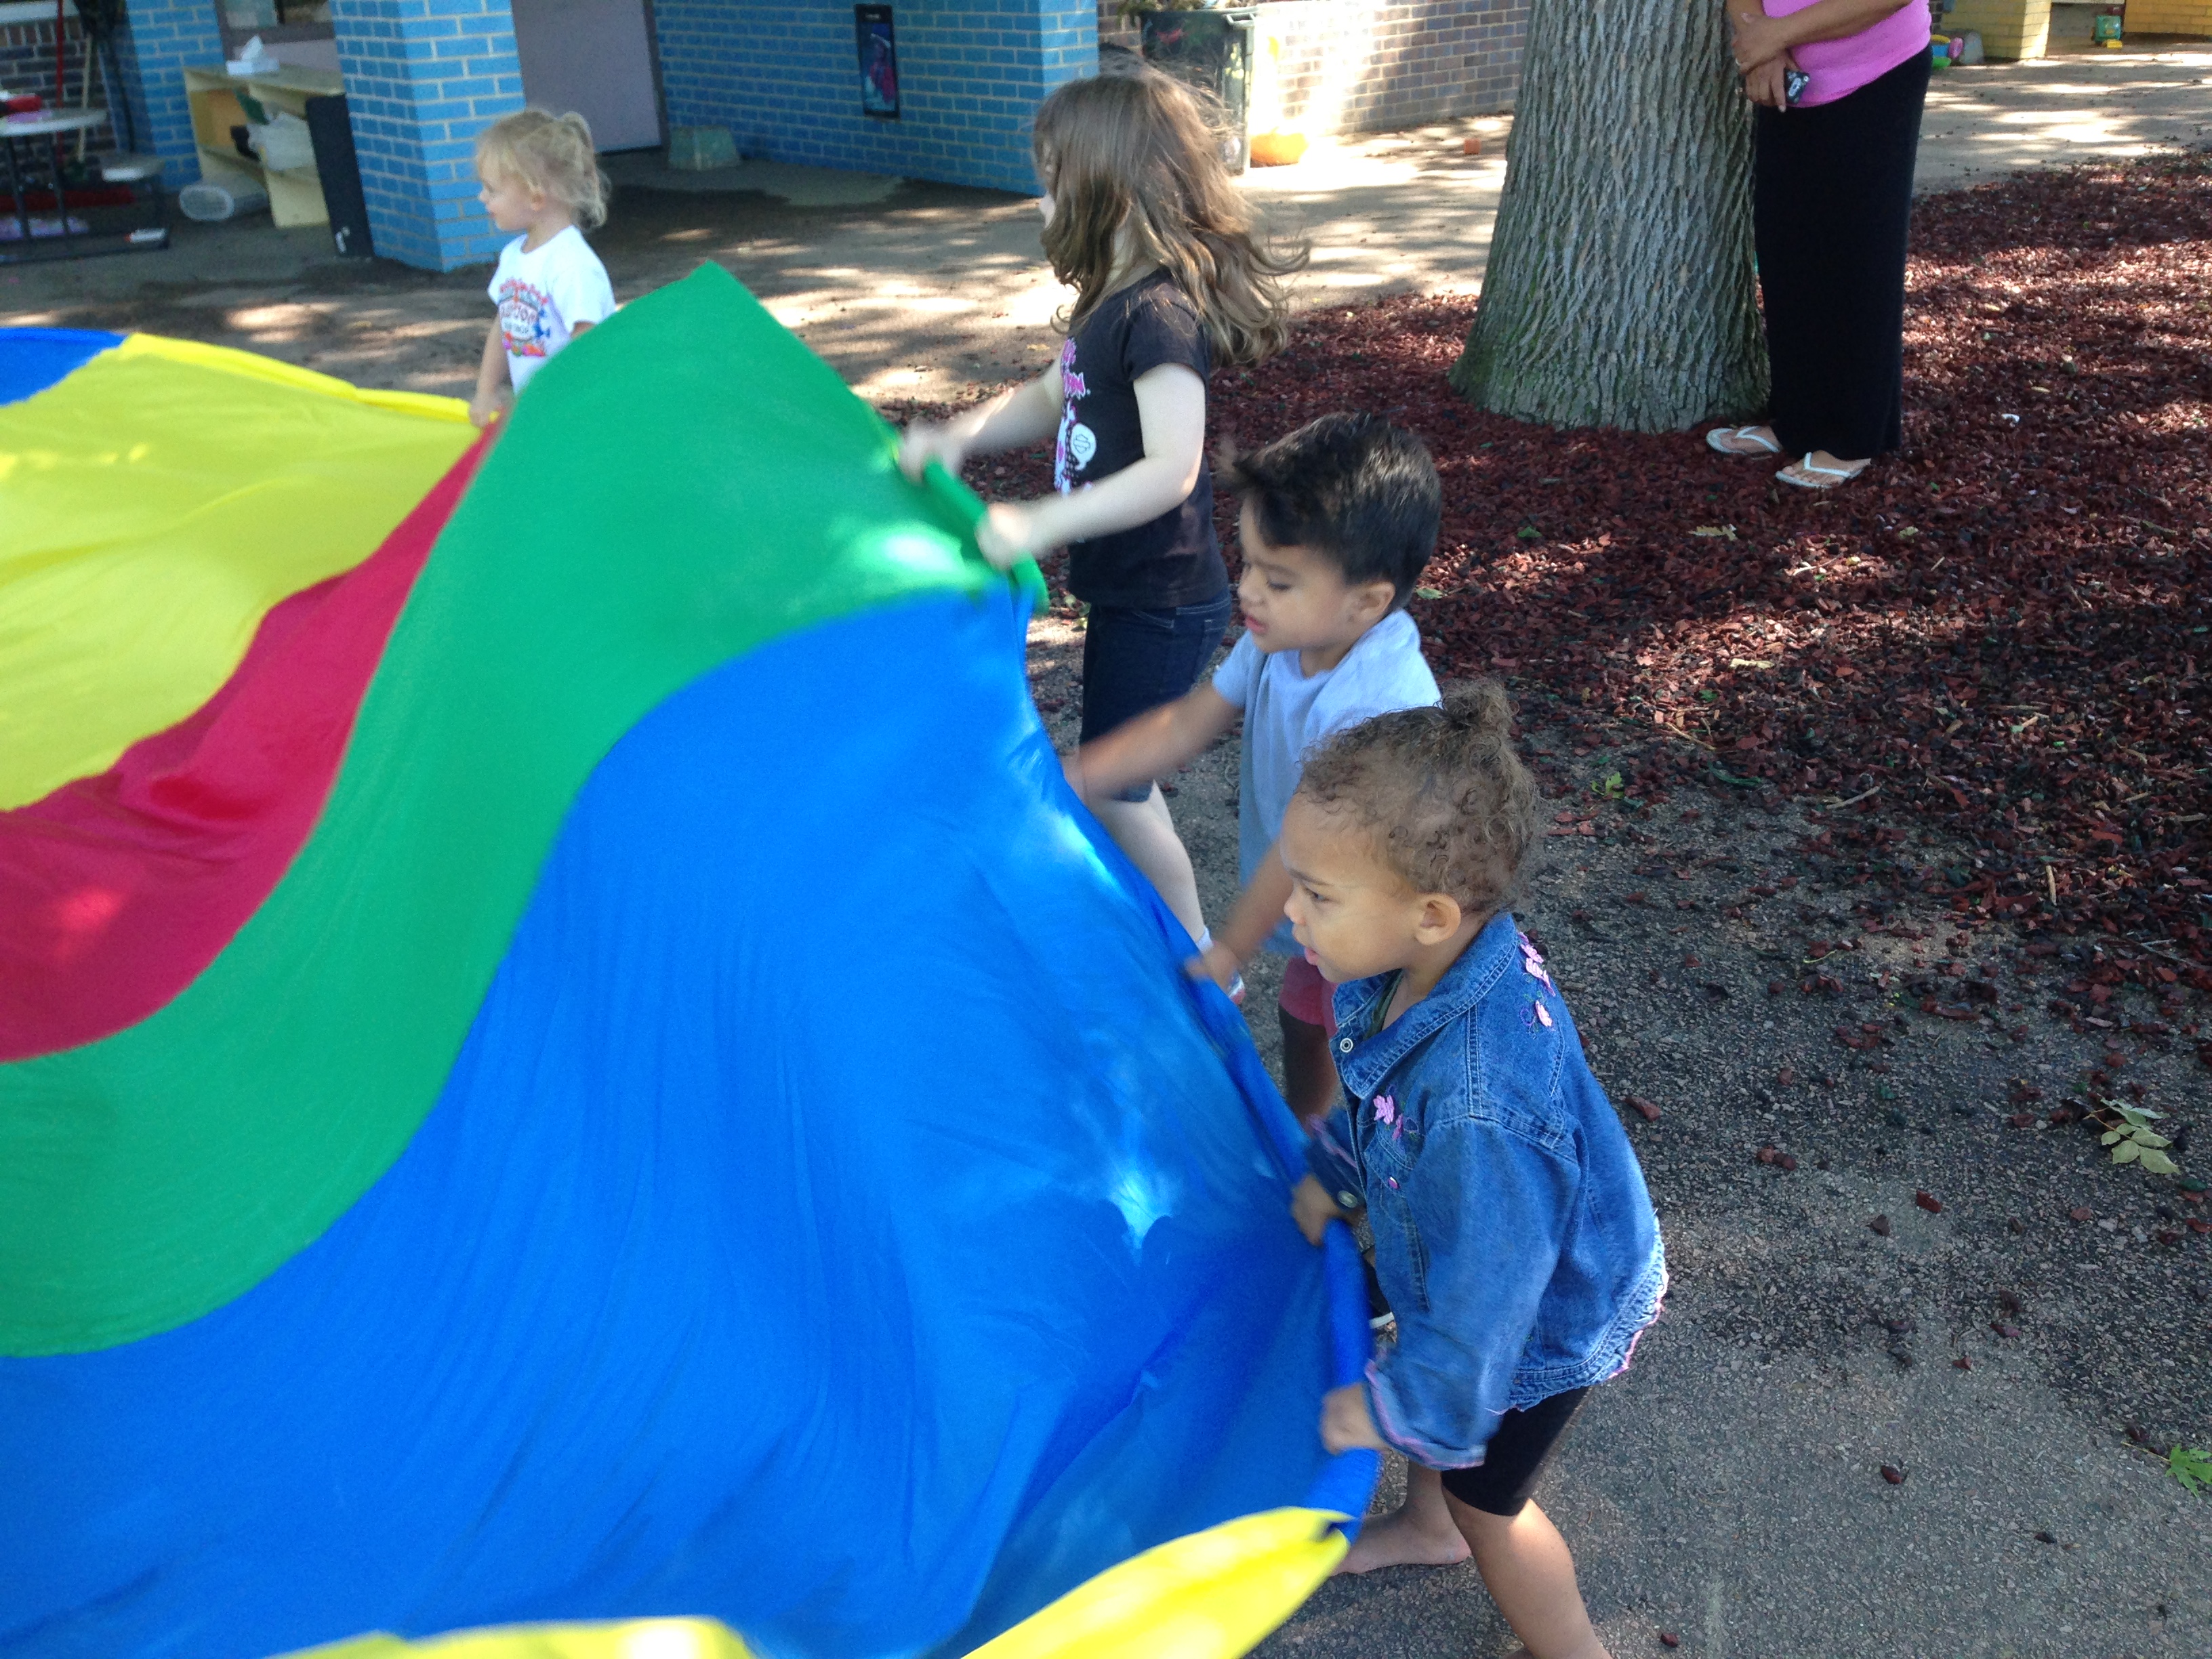 Children playing with colorful parachute